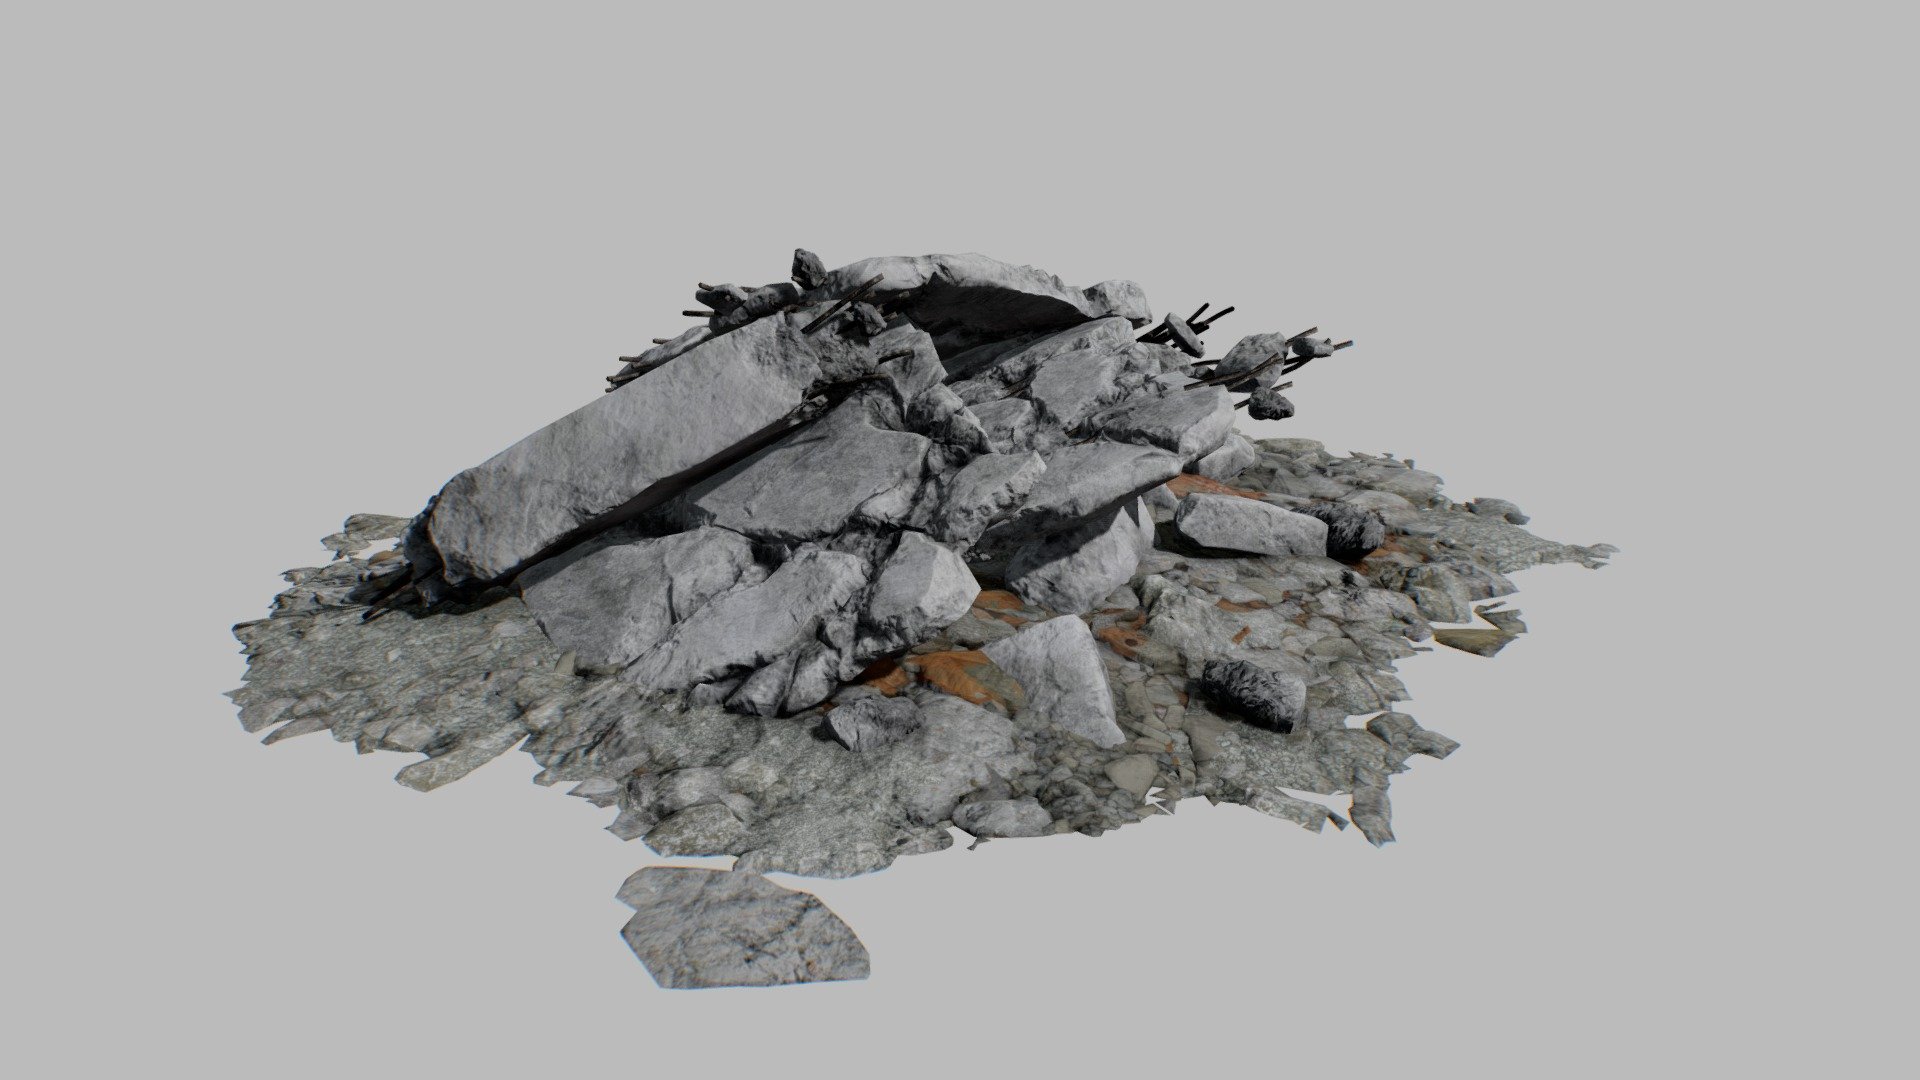 High quality 3D model of the Ruin Debris Rubble 04 for games / apps / VR / AR with PBR 4K textures

Clean topology based on quads and tris. This model is completely UVunwrapped. 4K textures for each elements

Textures
-Includes 4K PBR textures

Total:
-Polygons: 54616
-Vertices: 28562

Additional Notes
-If you have any problem or question about this model please content me and I will be response as soon as possible . and leave thumb up if you like the model also give a postive rate if you bought this model and you like it.
-Please make sure to check out my other Models, you may find something prefect for your project. Thanks :) - Ruin Debris Rubble 04 - 3D model by Cheboksary 3d model